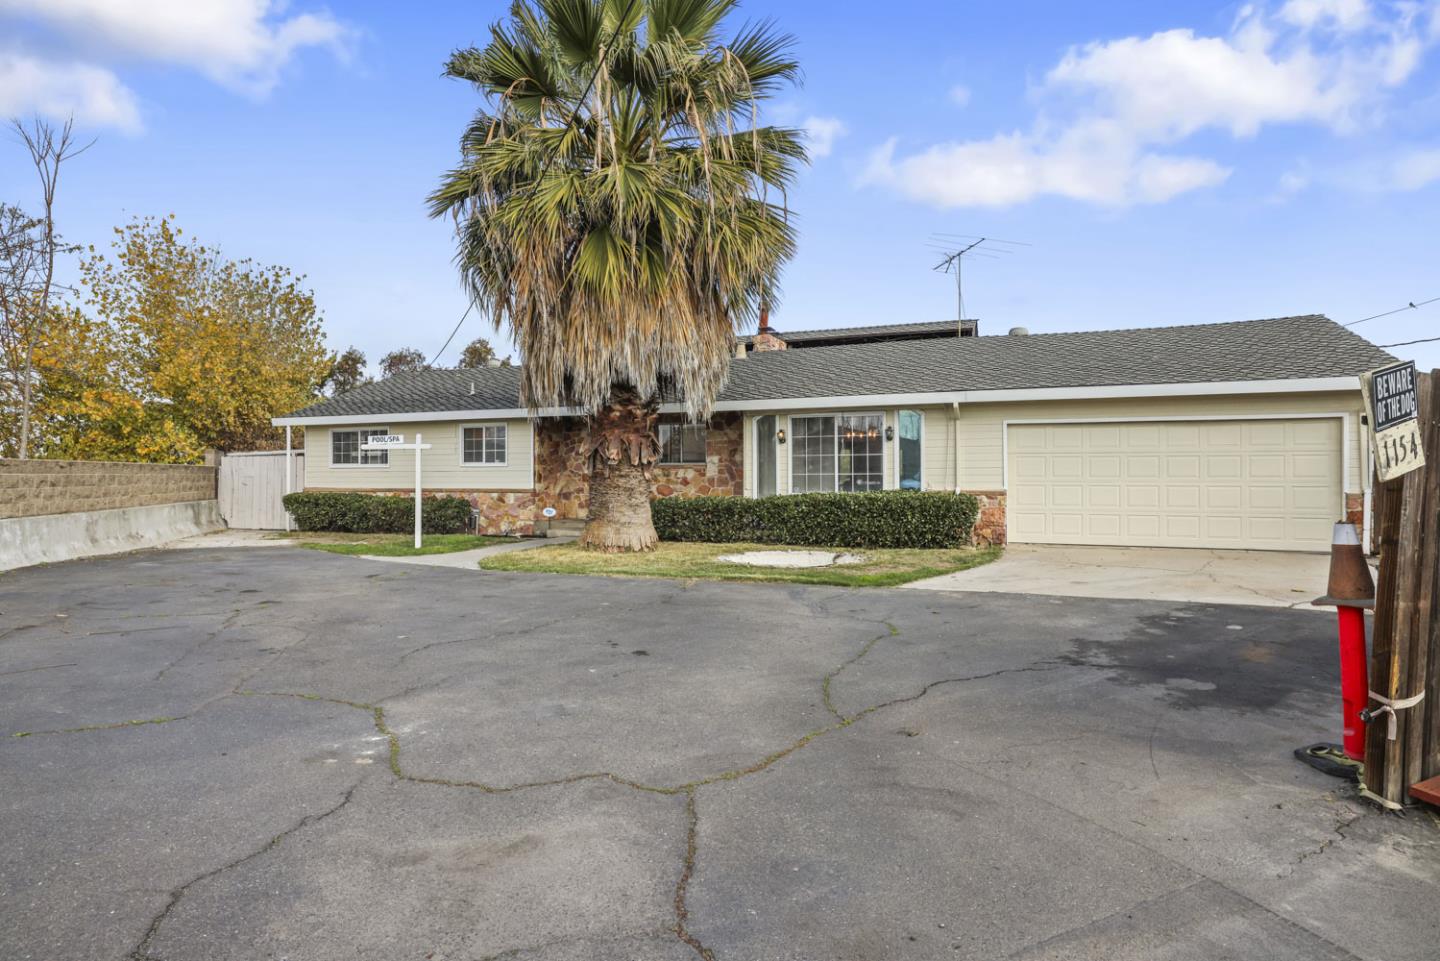 Photo of 1154 Mitchell Rd in Modesto, CA